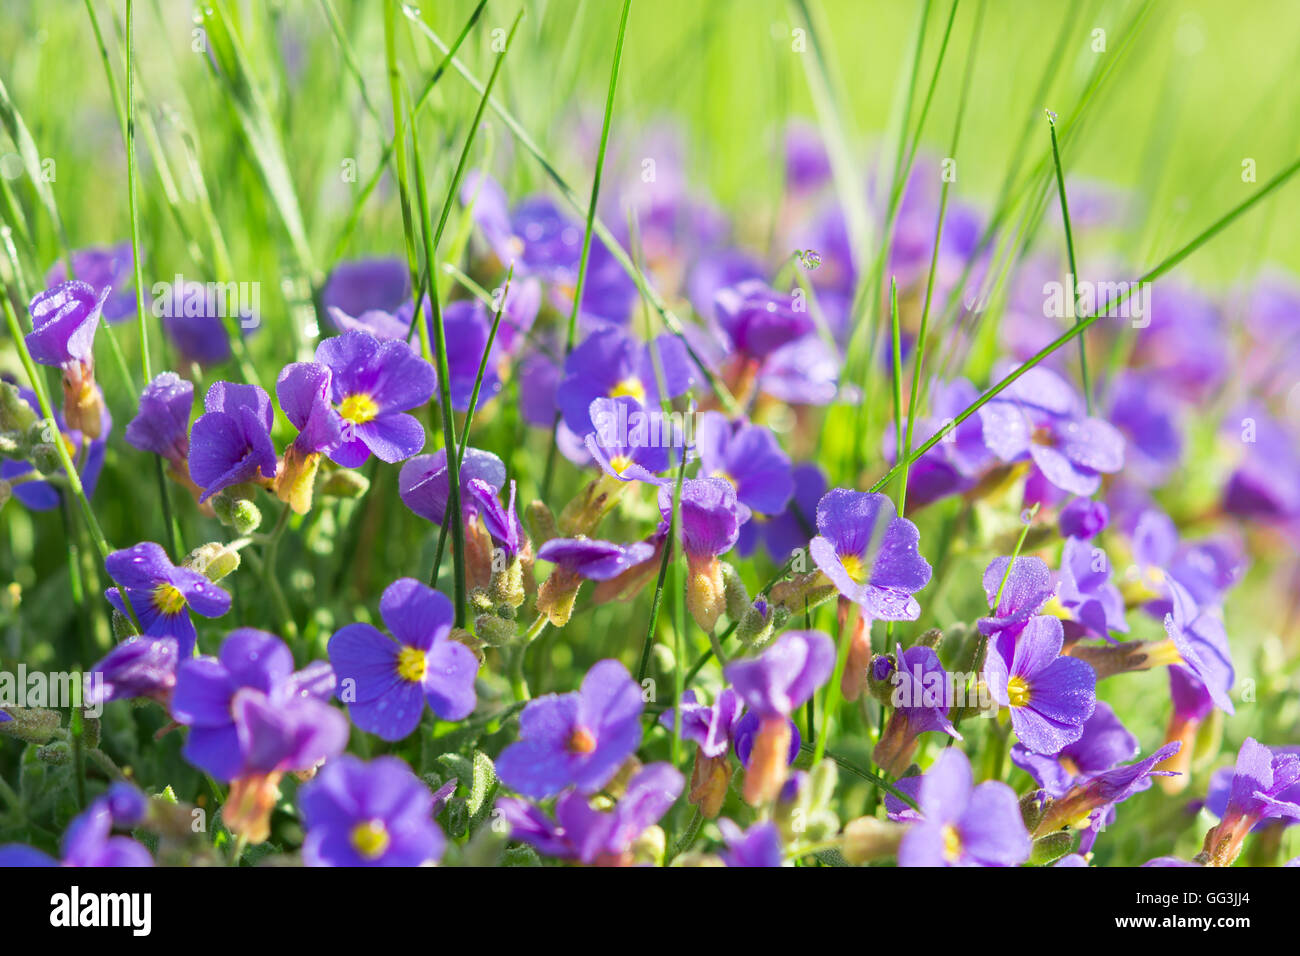 Multitude Aubrieta small blue flowers in grass on sunny alpine mountain glade with dew drops Stock Photo